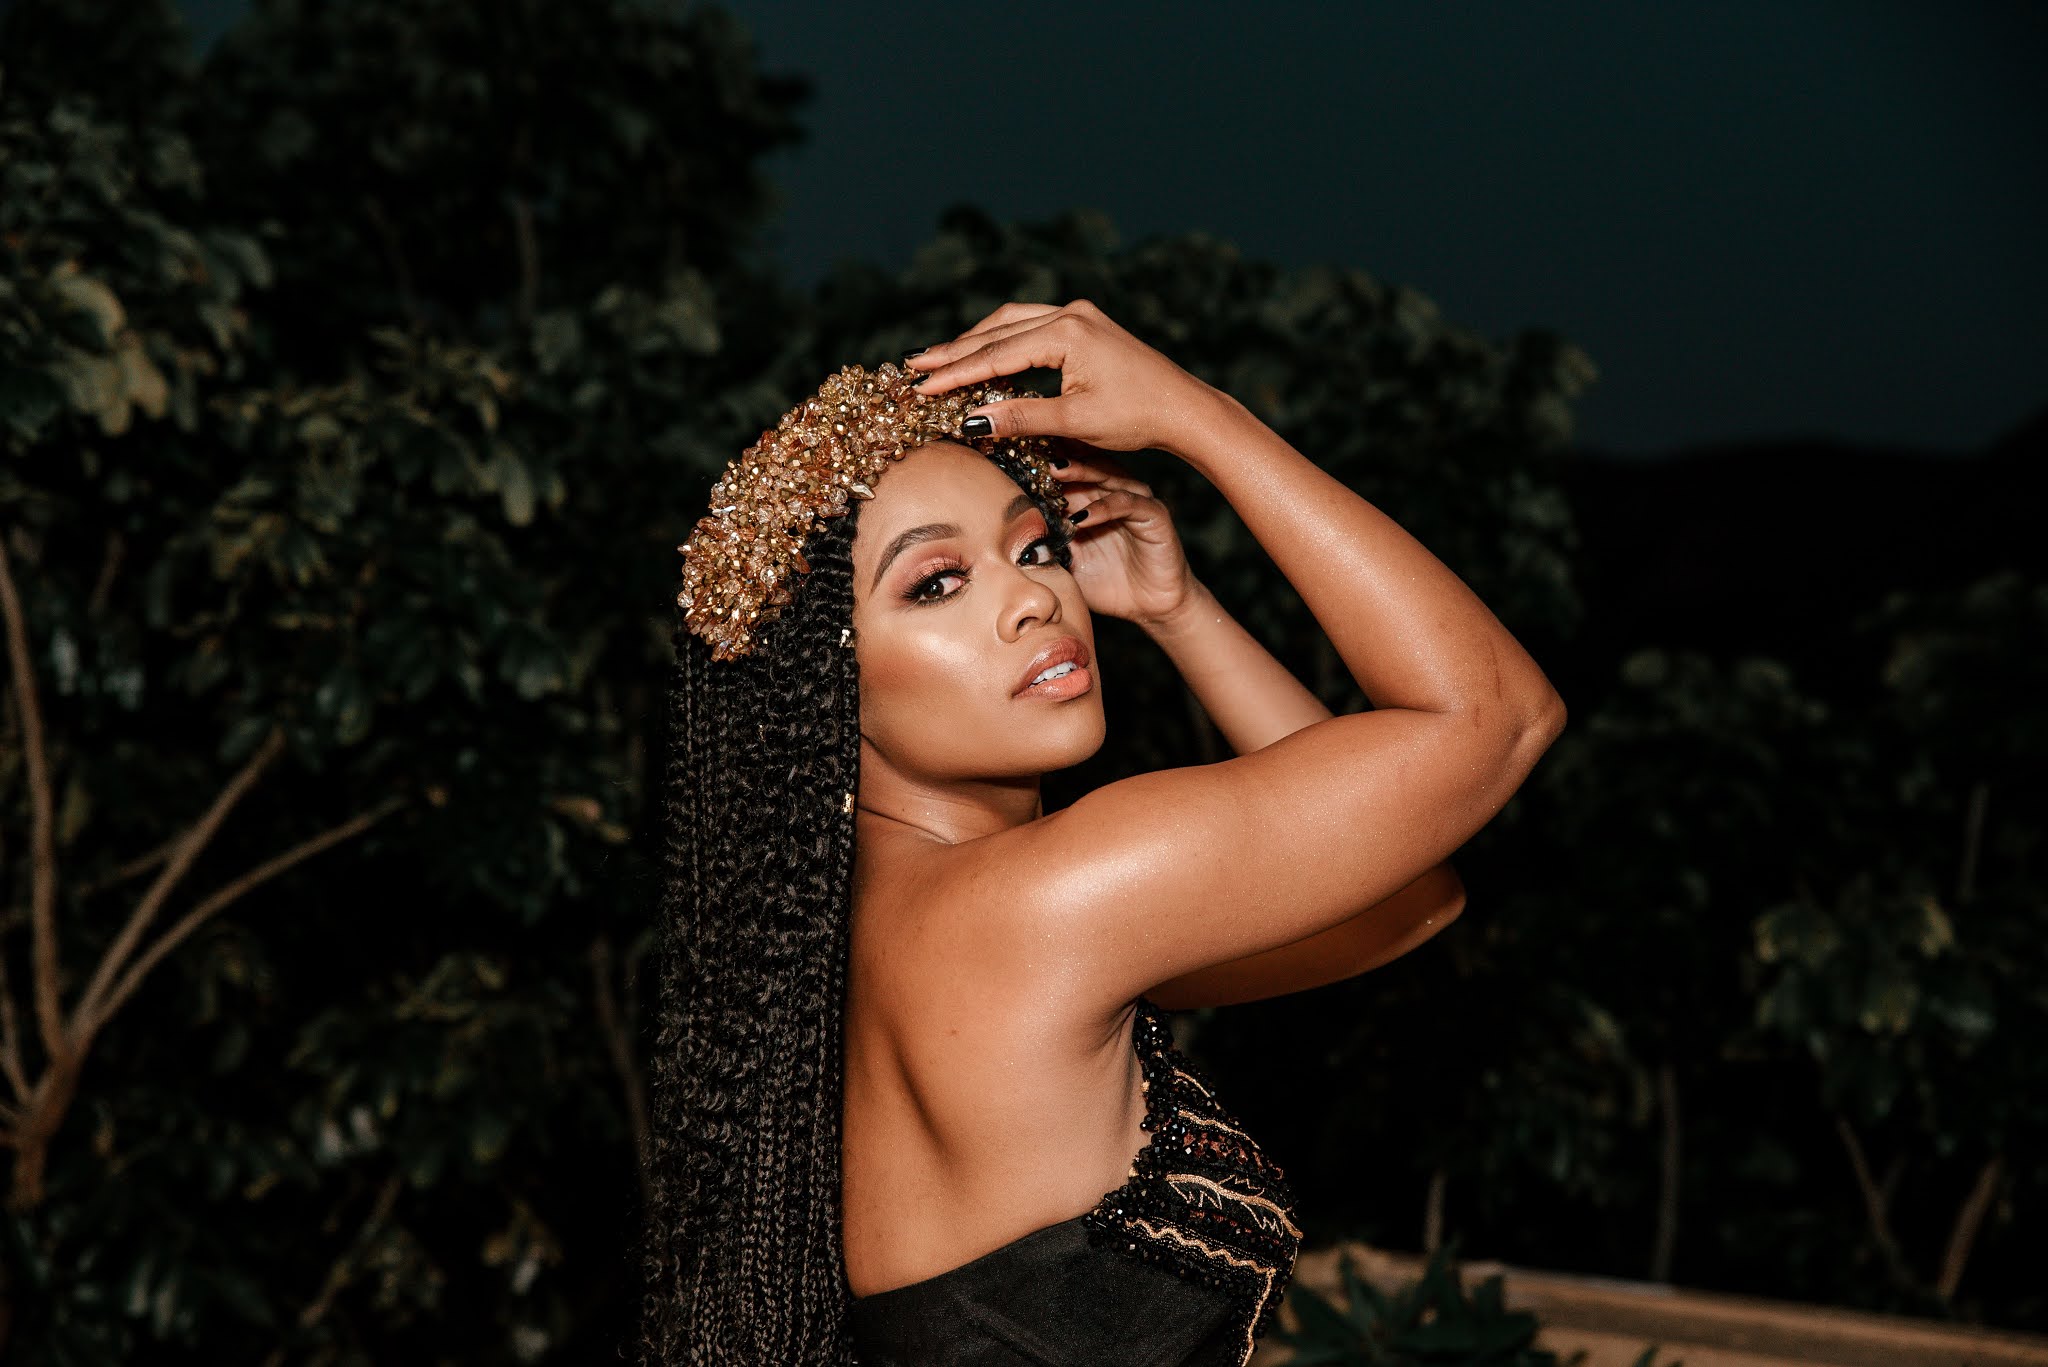 Nomzamo mbatha to host miss south africa 2020 pageant finale.